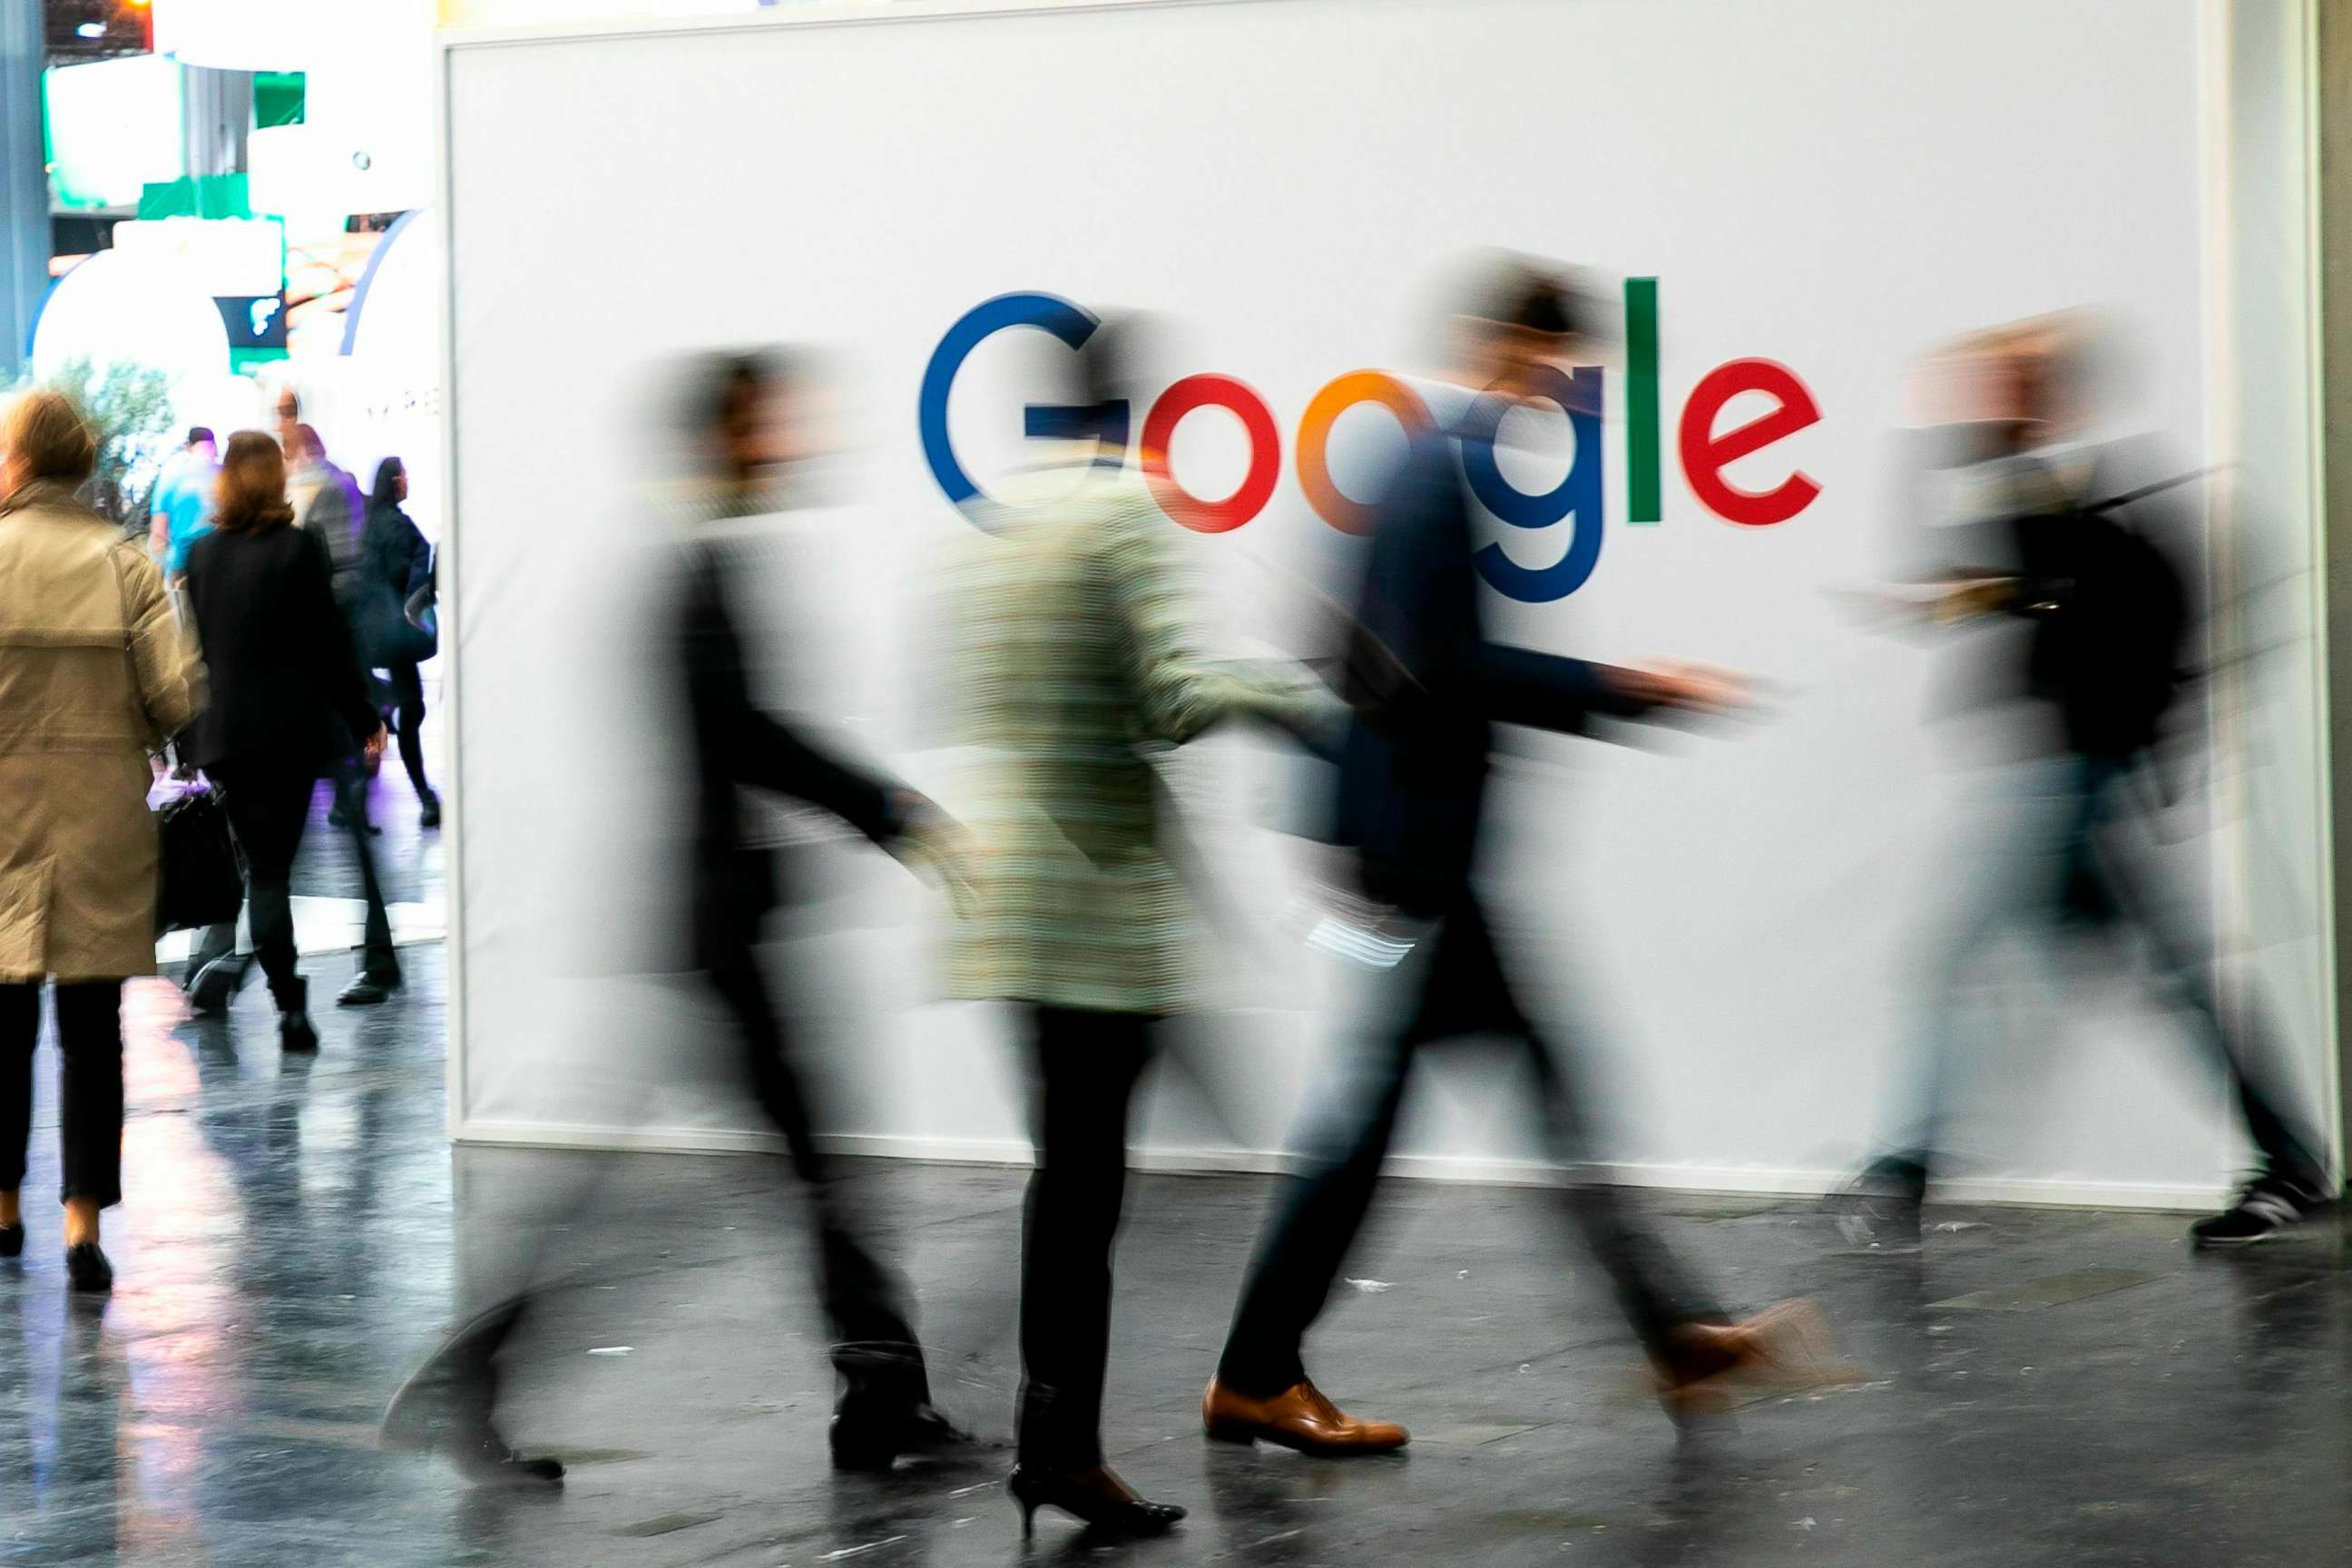 PHOTO: People walk past Google signage at a technology conference in Paris, May 17, 2019.